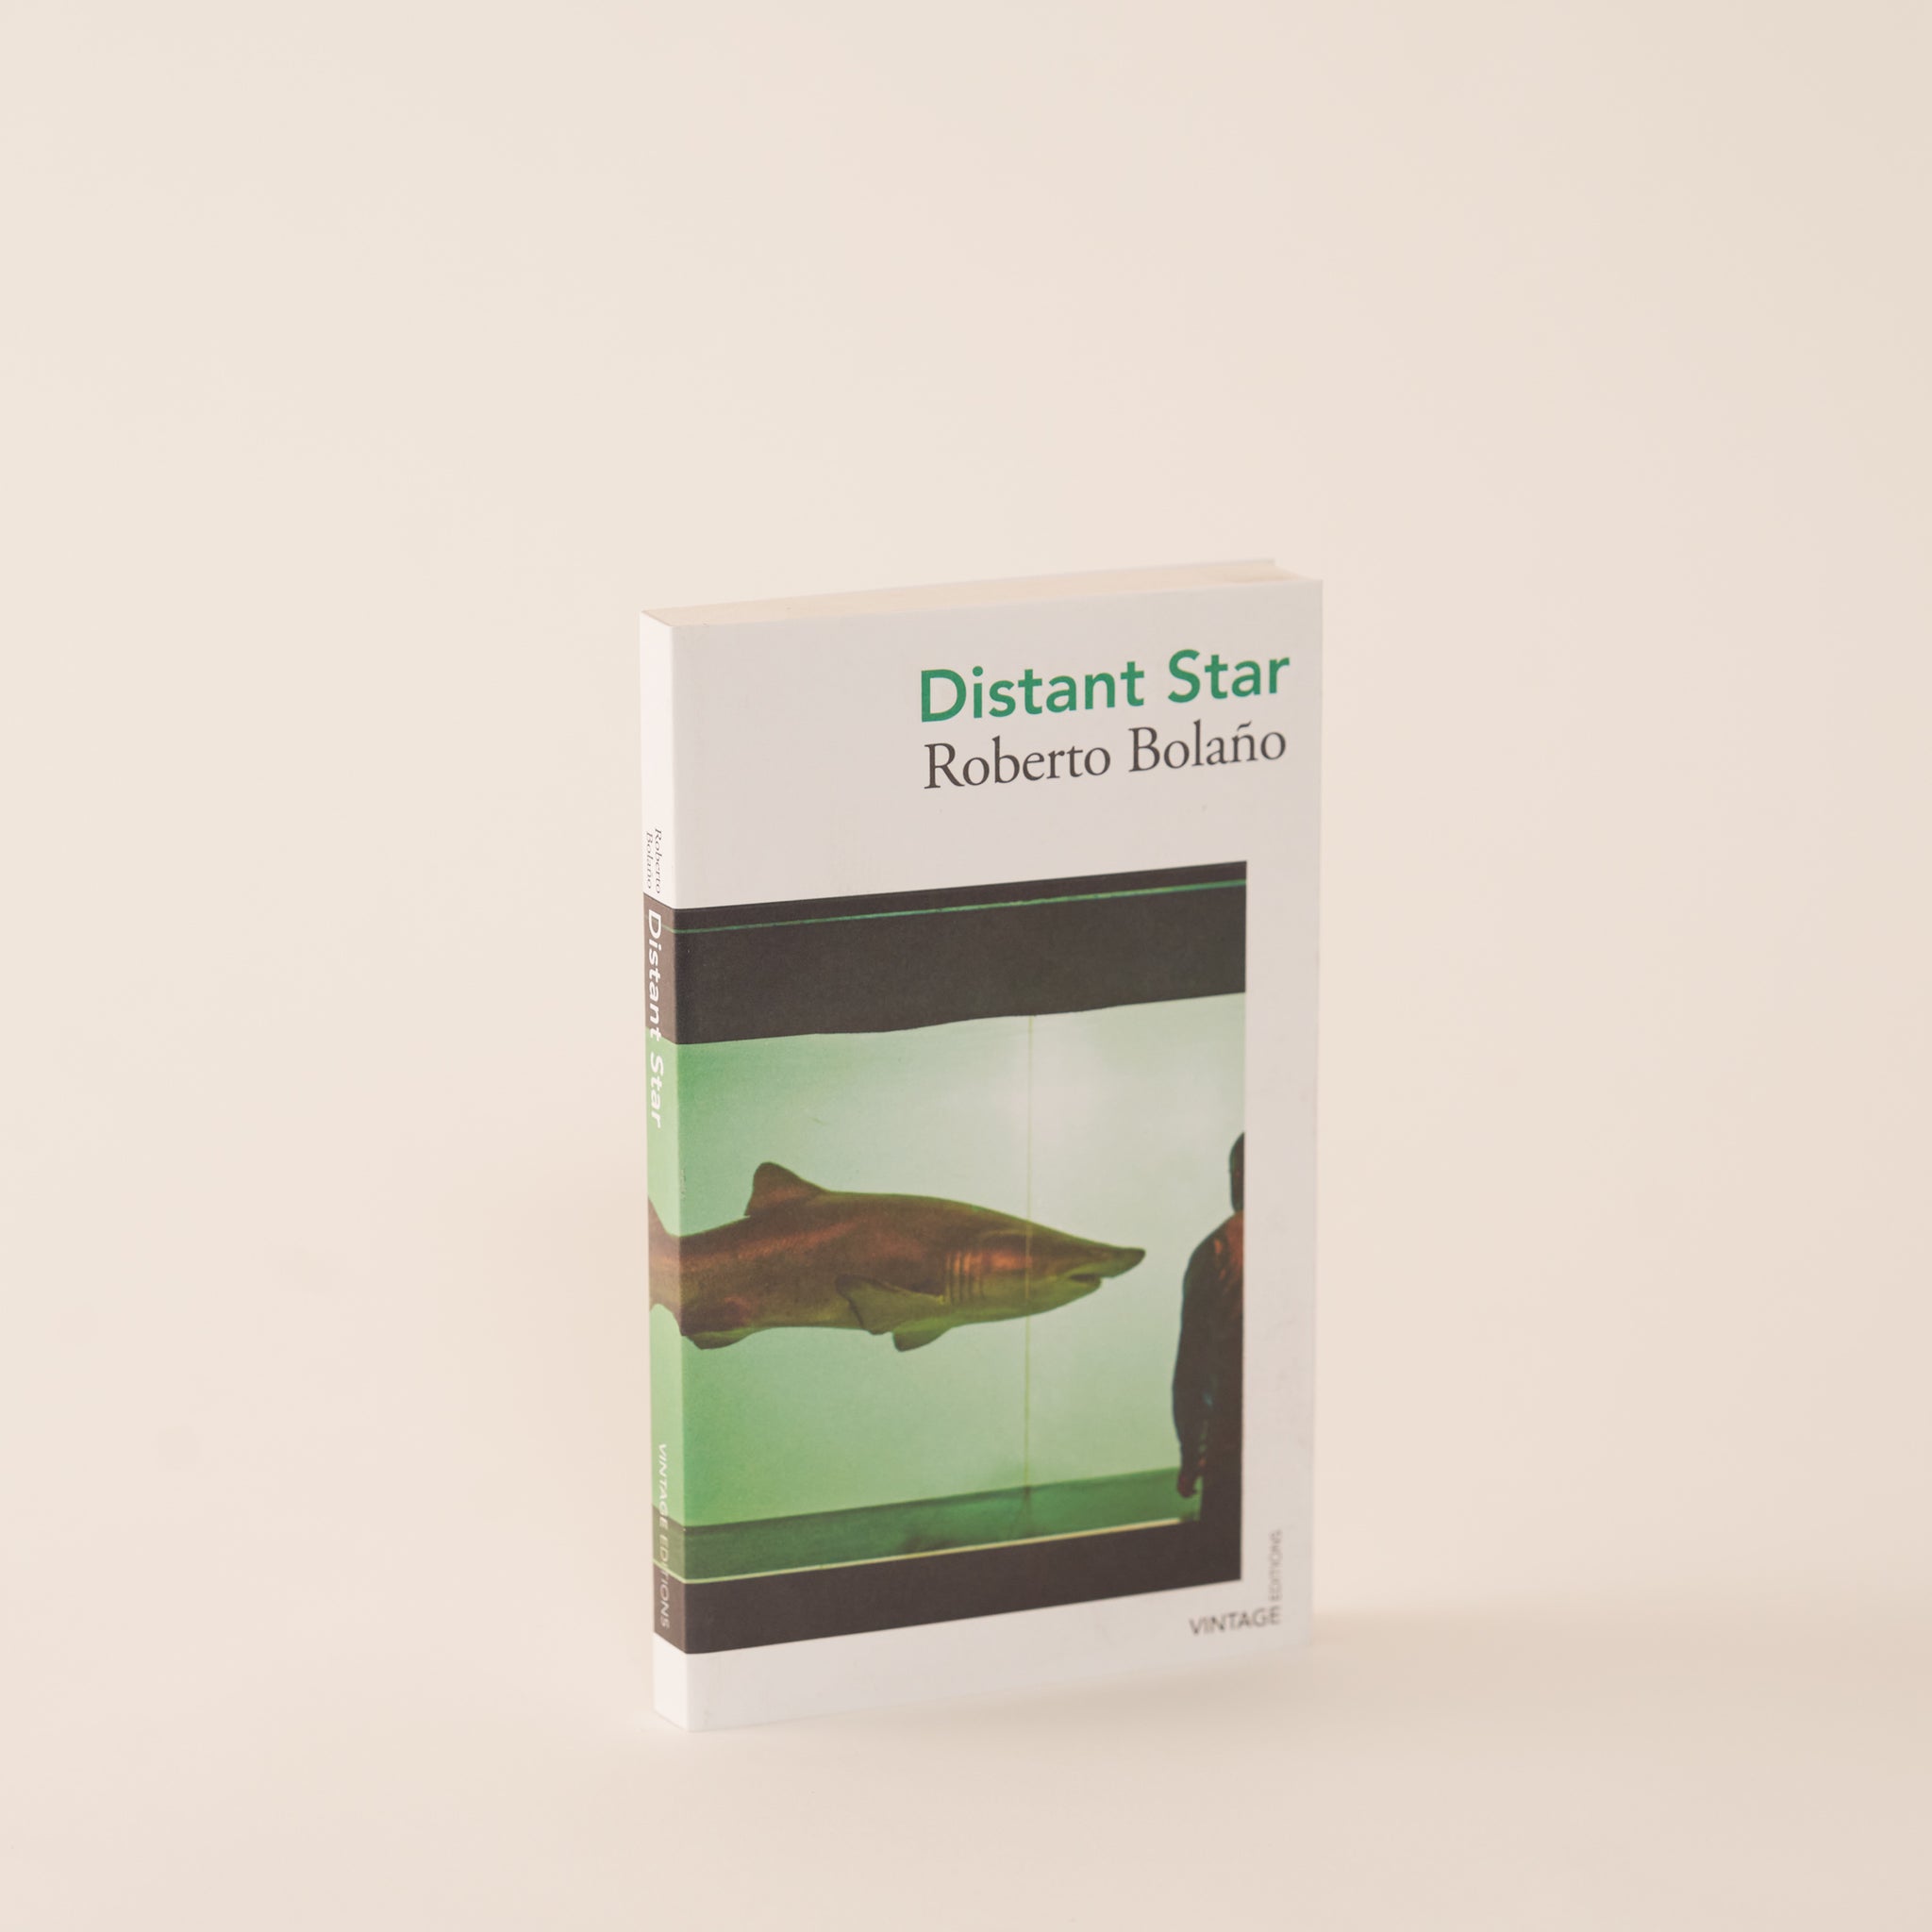 Distant Star by Roberto Bolaño